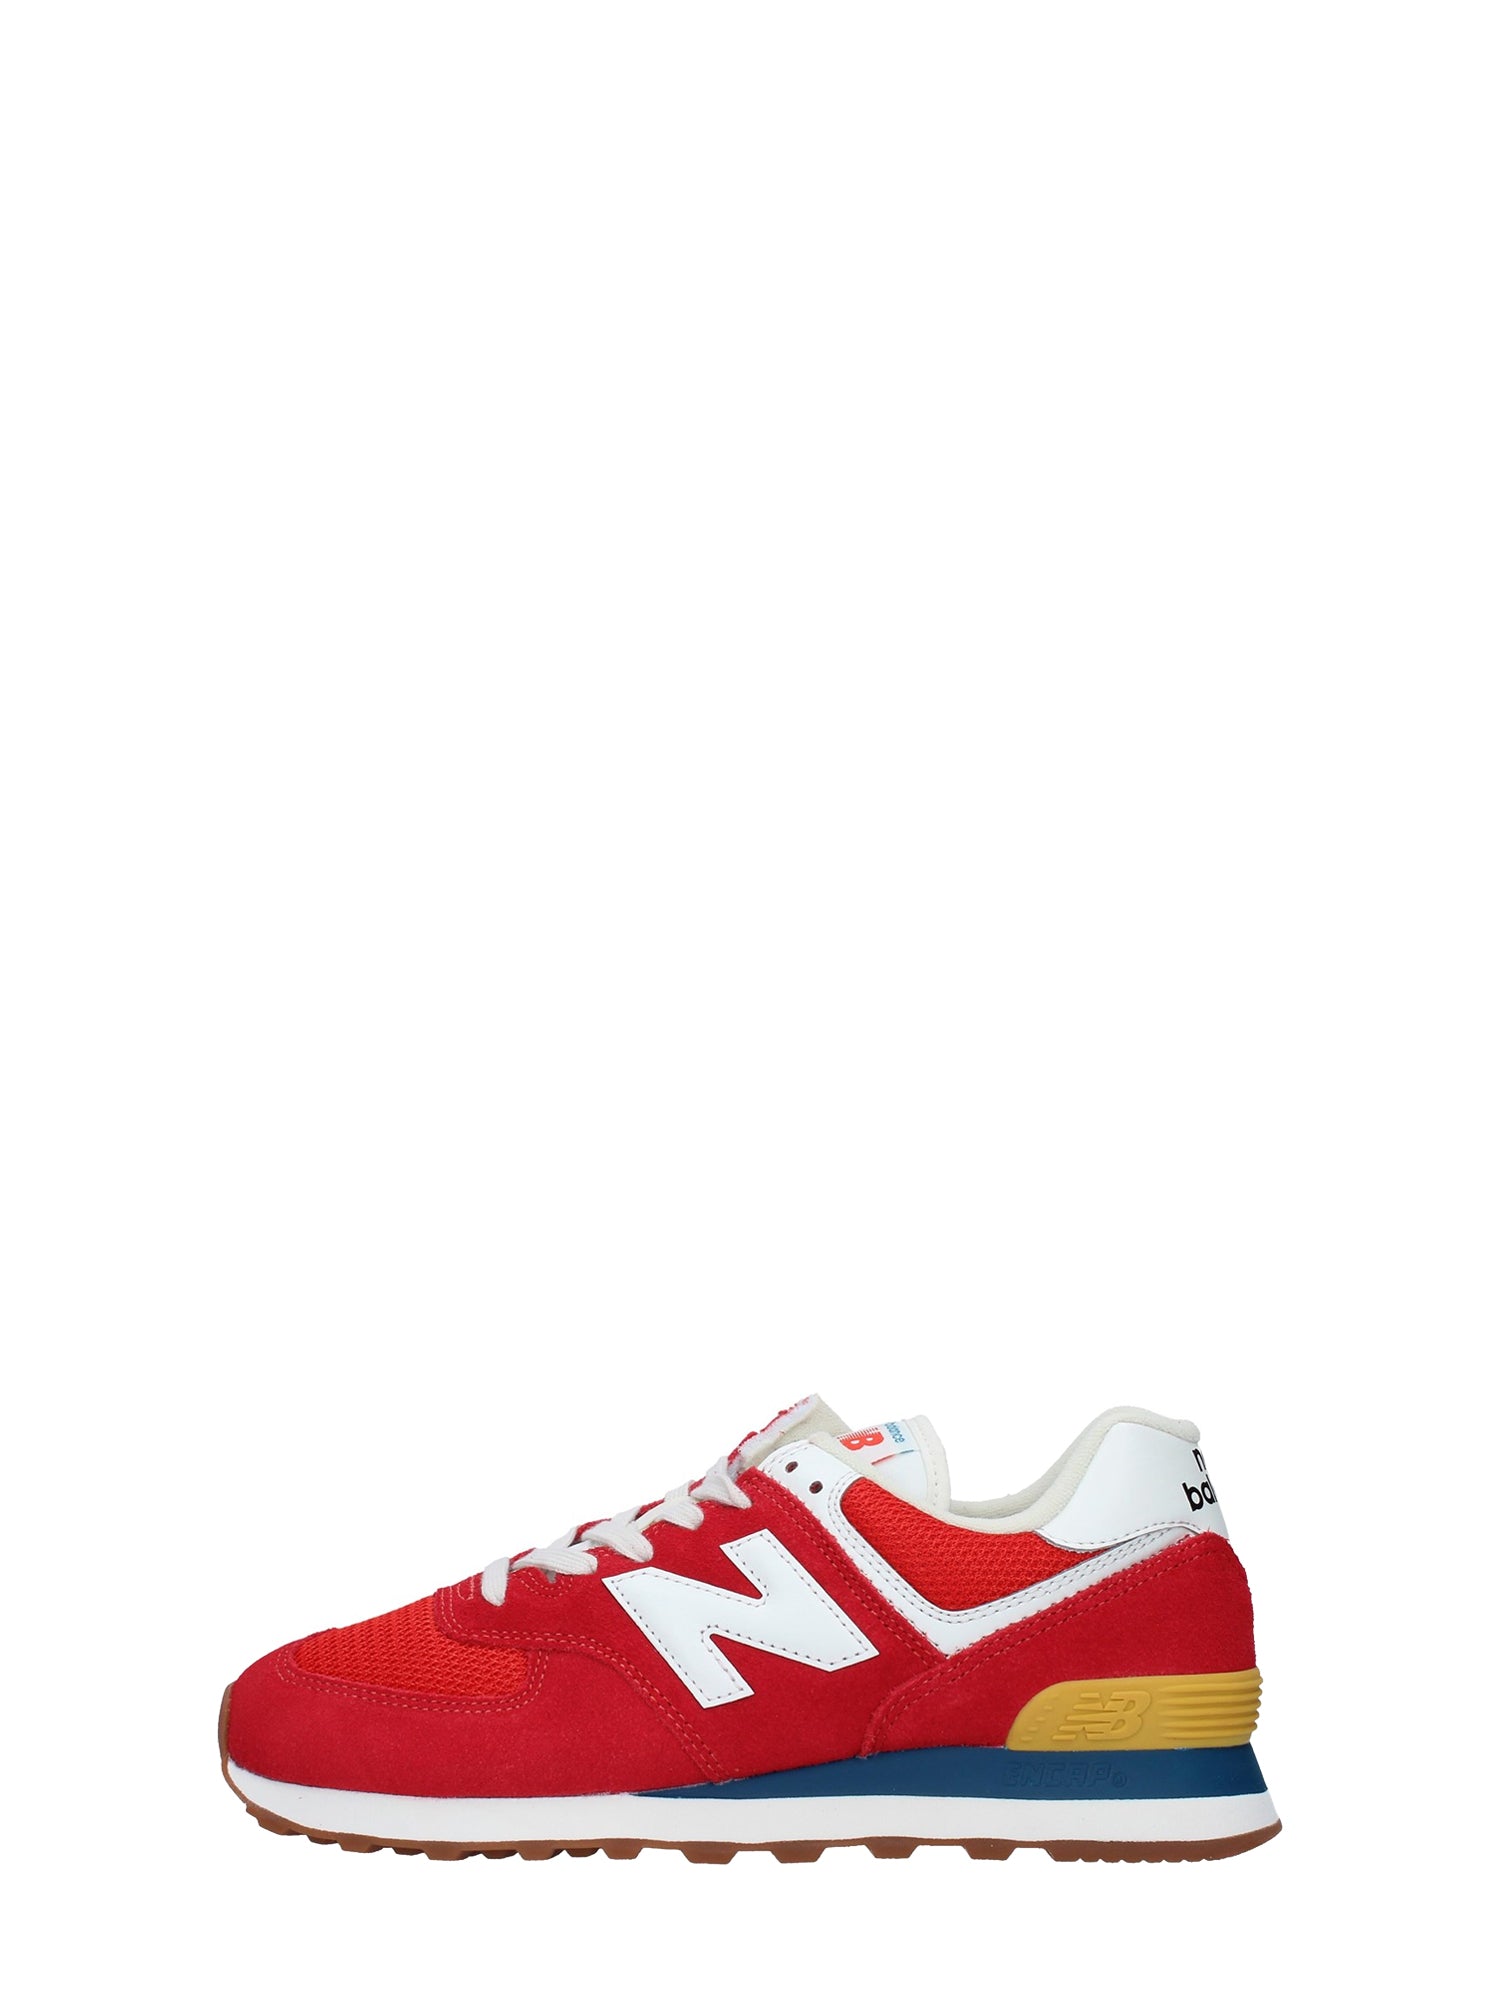 NEW BALANCE SNEAKERS 574 ROSSO